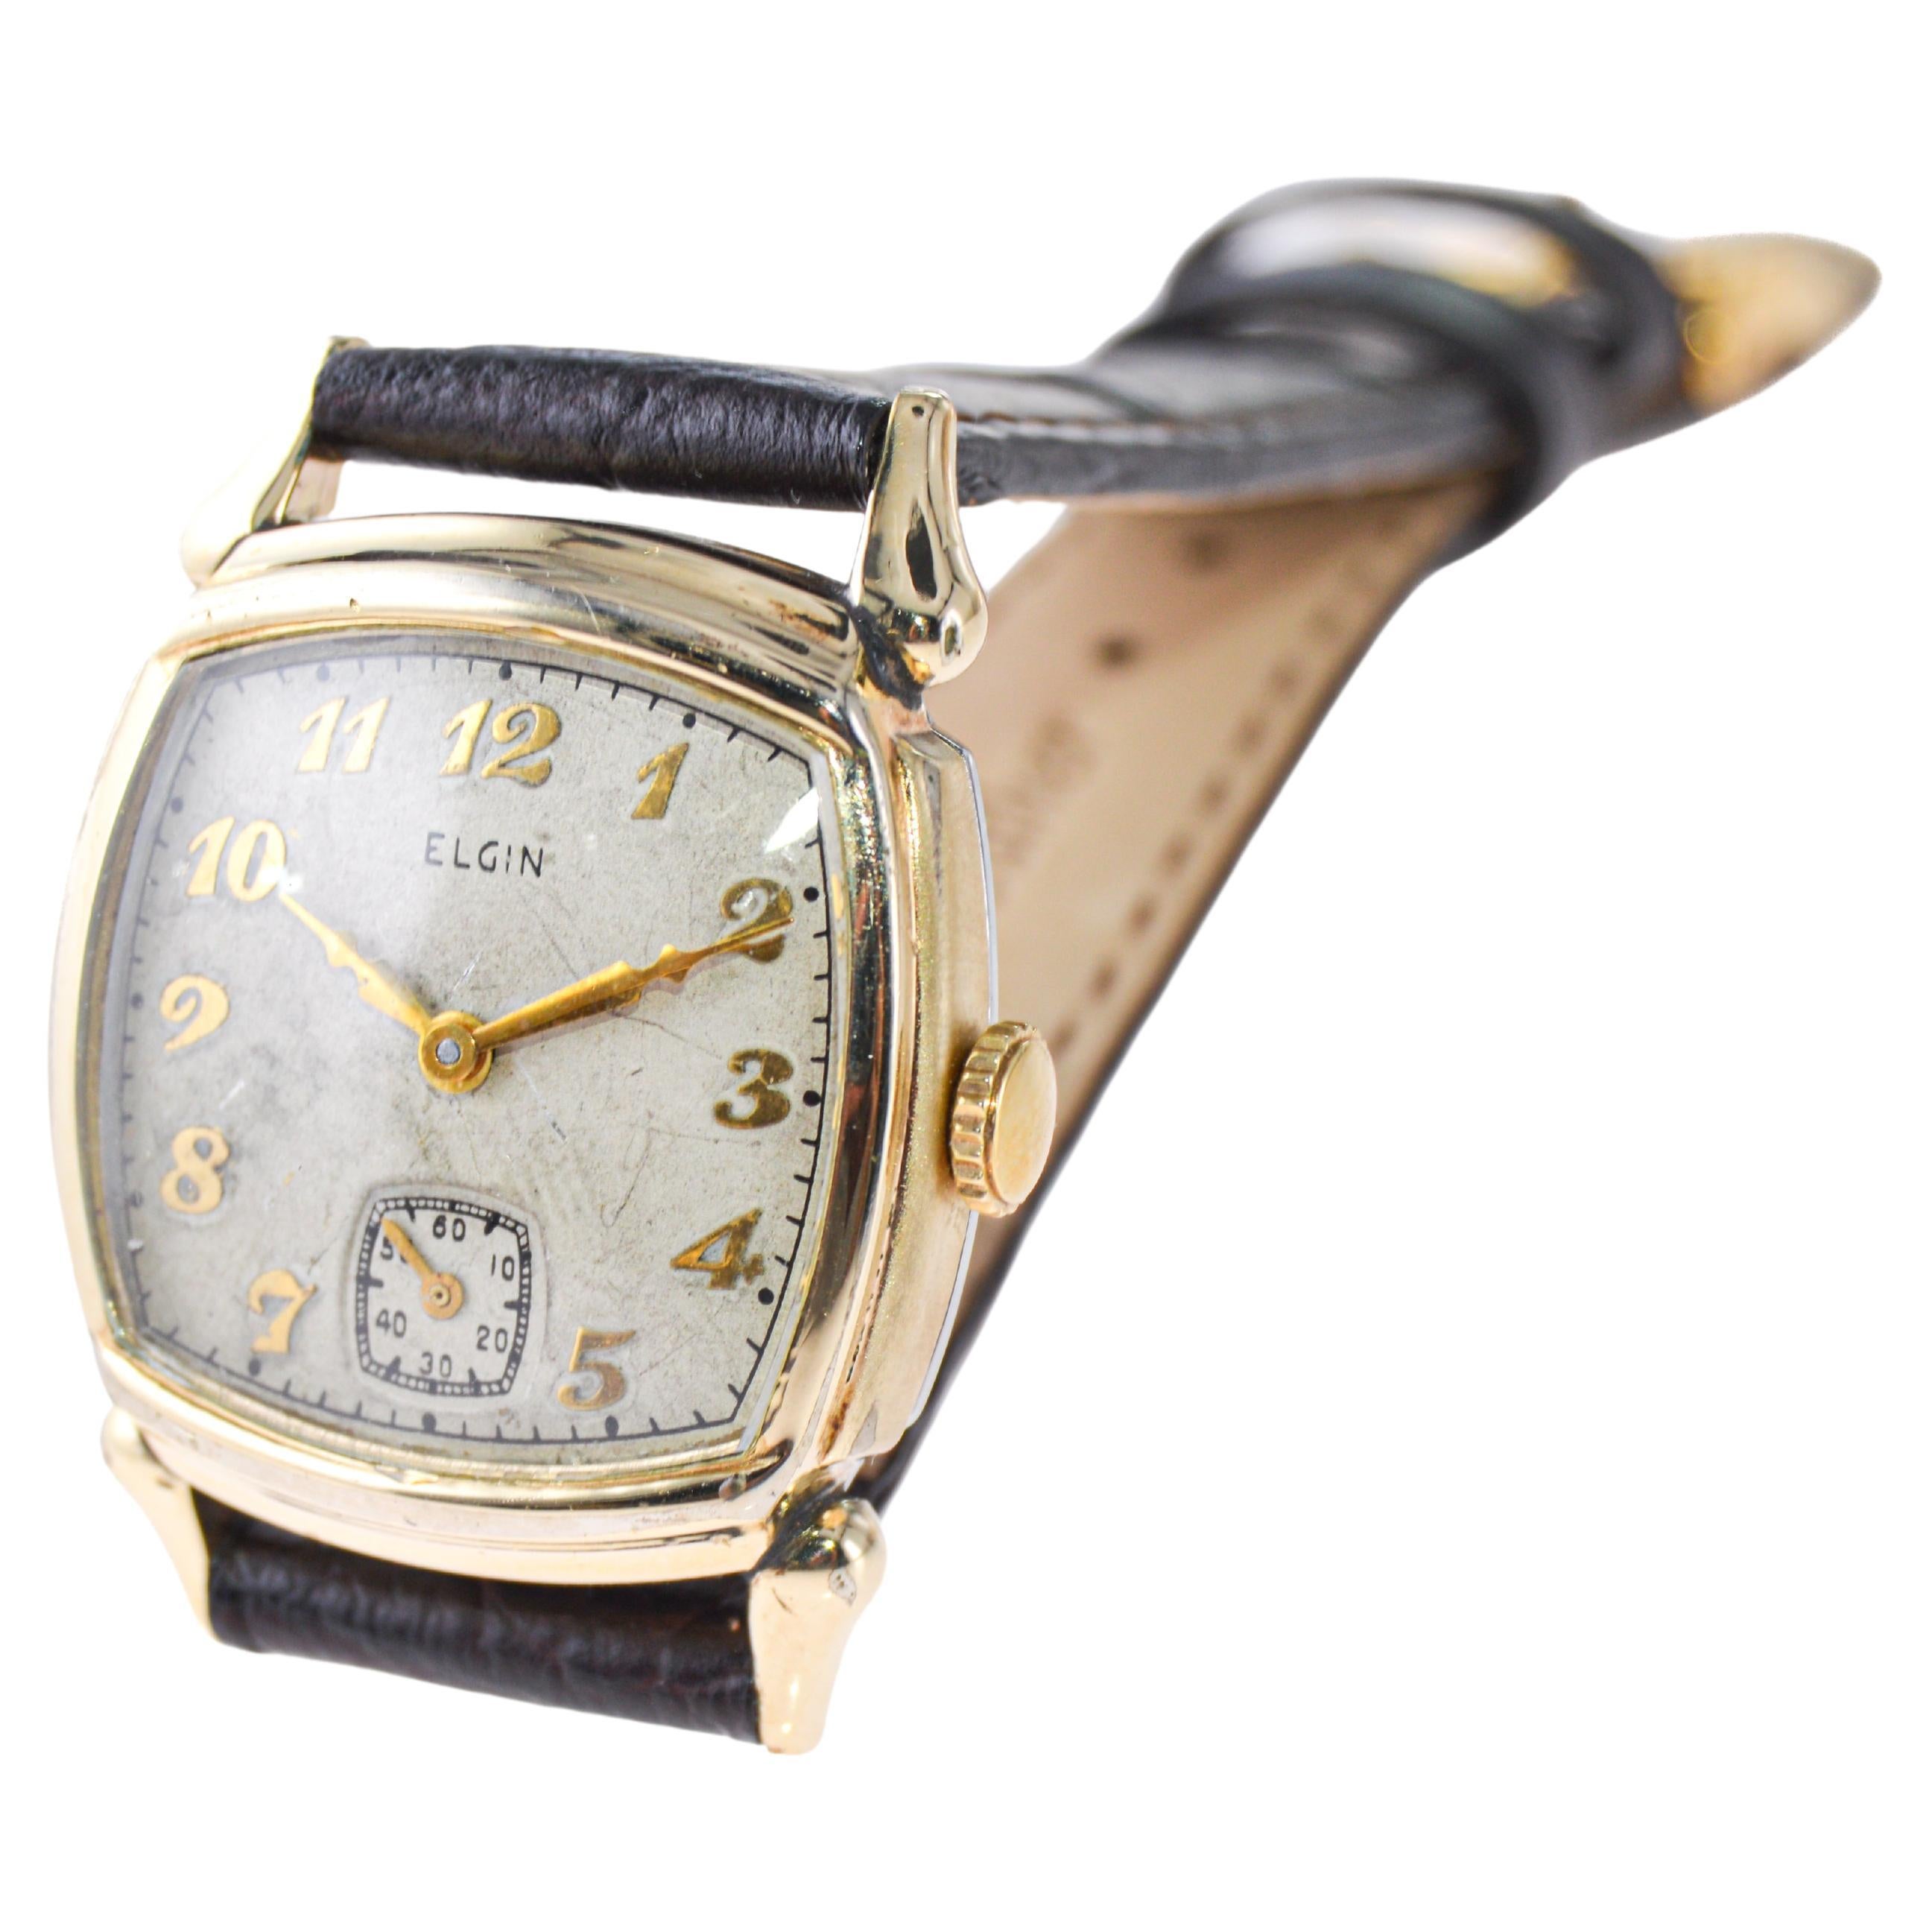 Elgin Gold Filled Art Deco Cushion Shaped American Watch with Original Dial 1940 For Sale 5